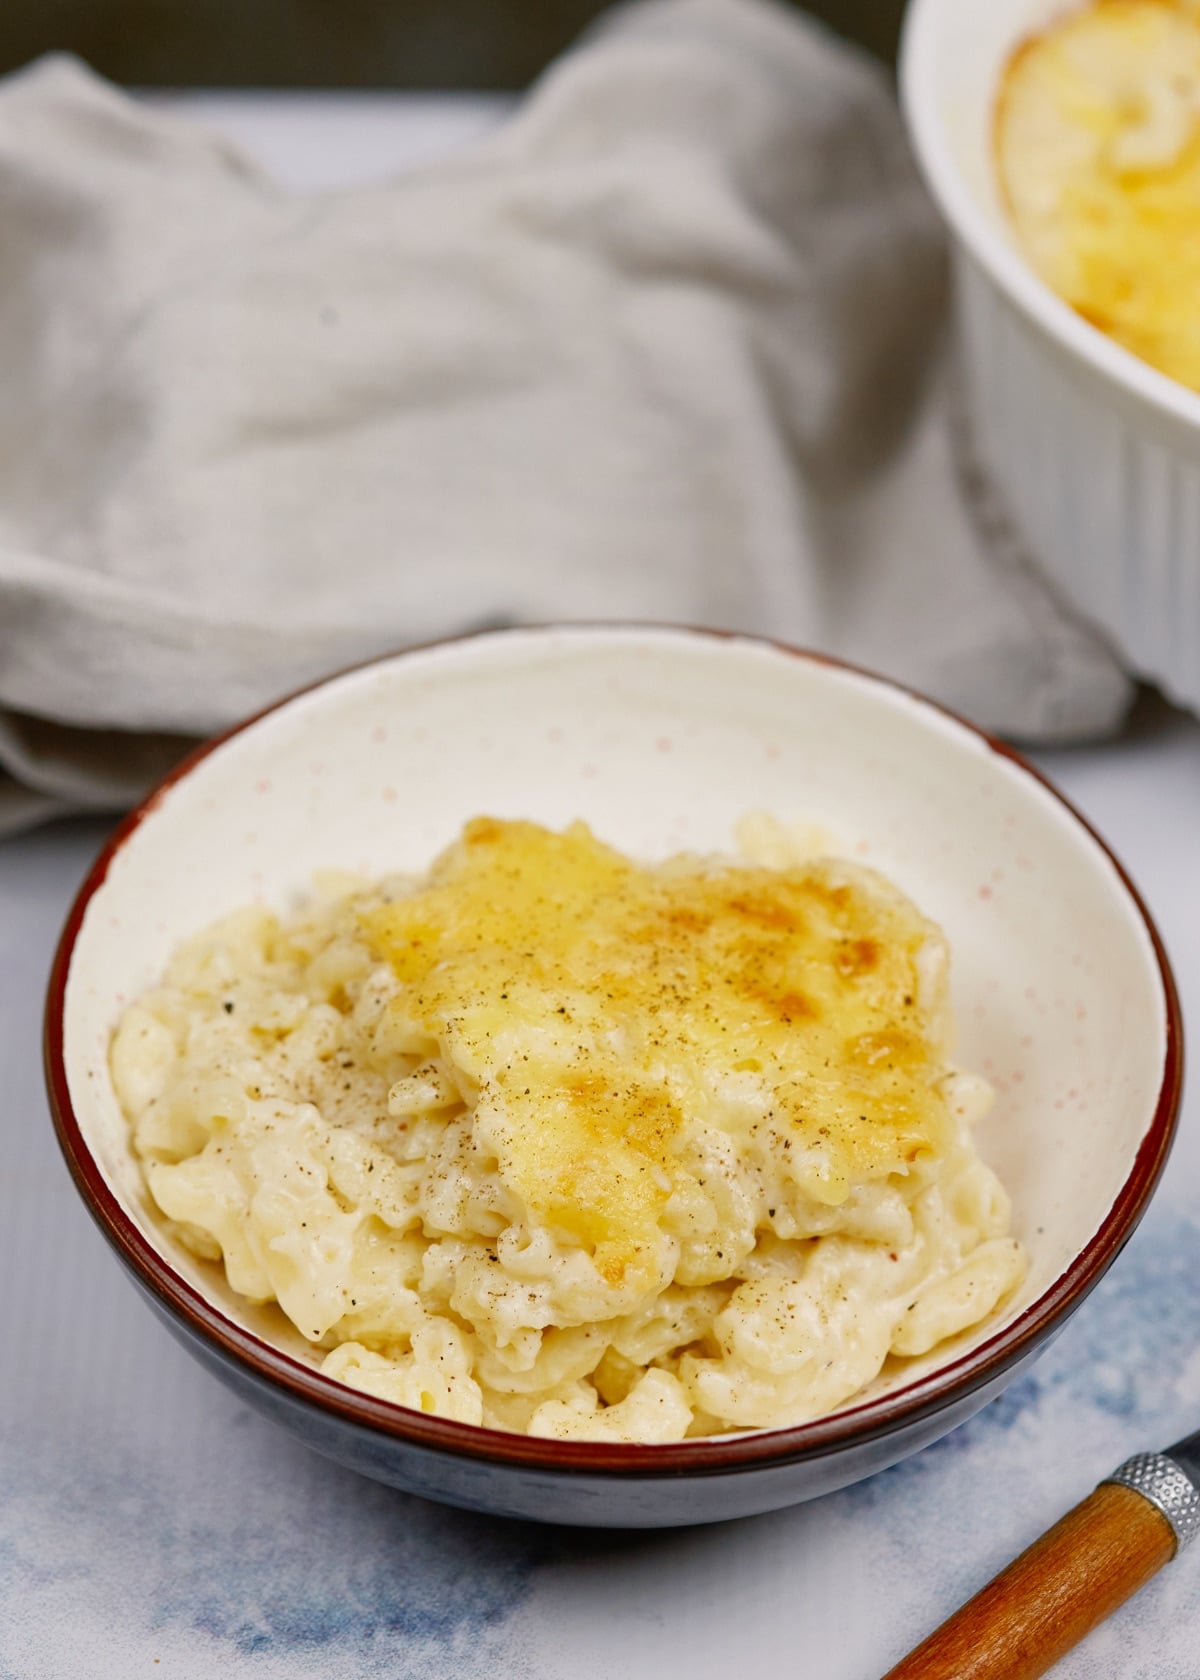 baked macaroni and cheese casserole in a white bowl